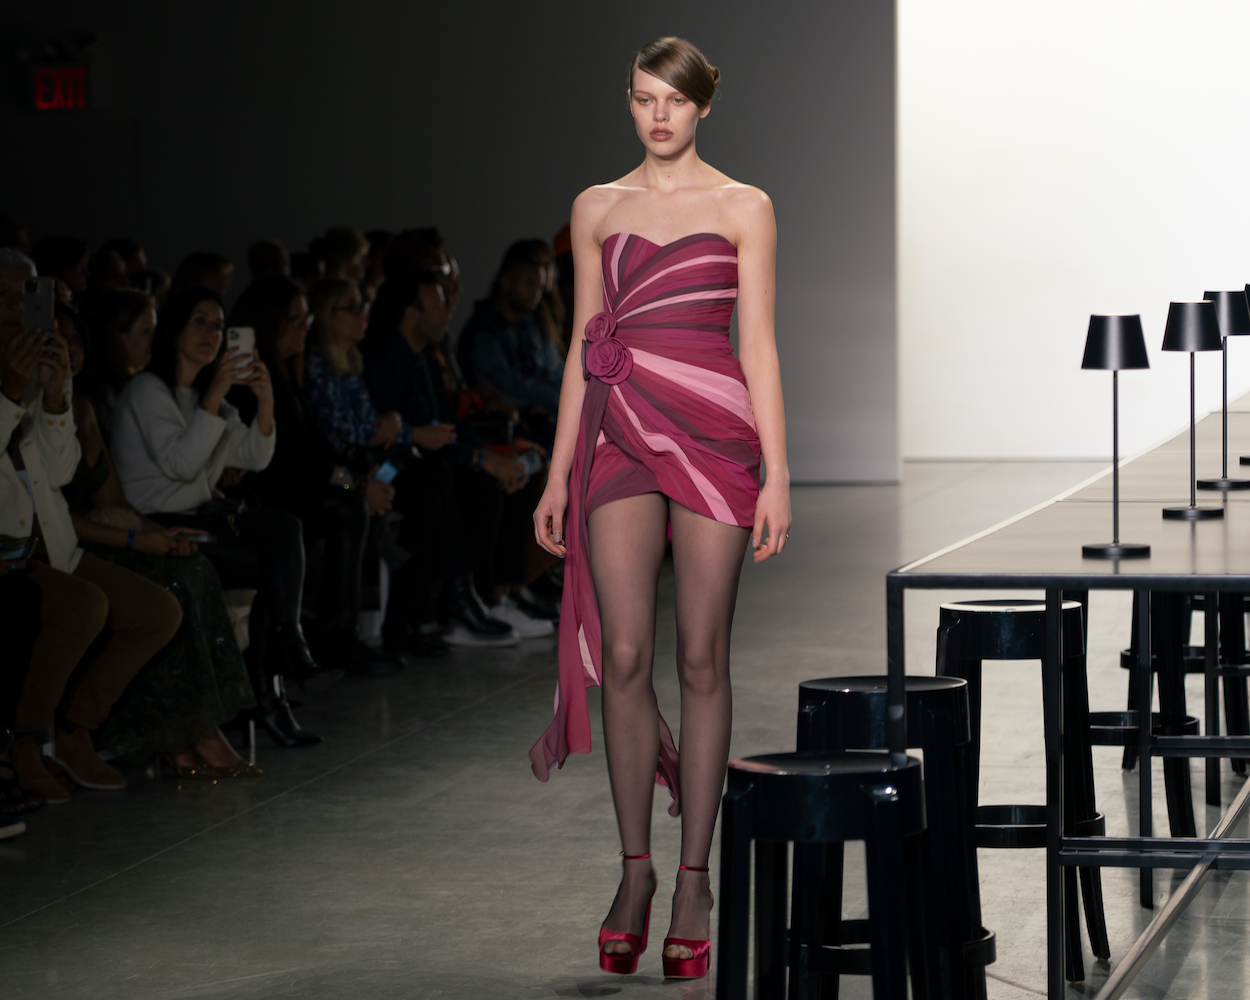 A model walking down the runway wearing a red, pink and maroon mini dress with red heels.